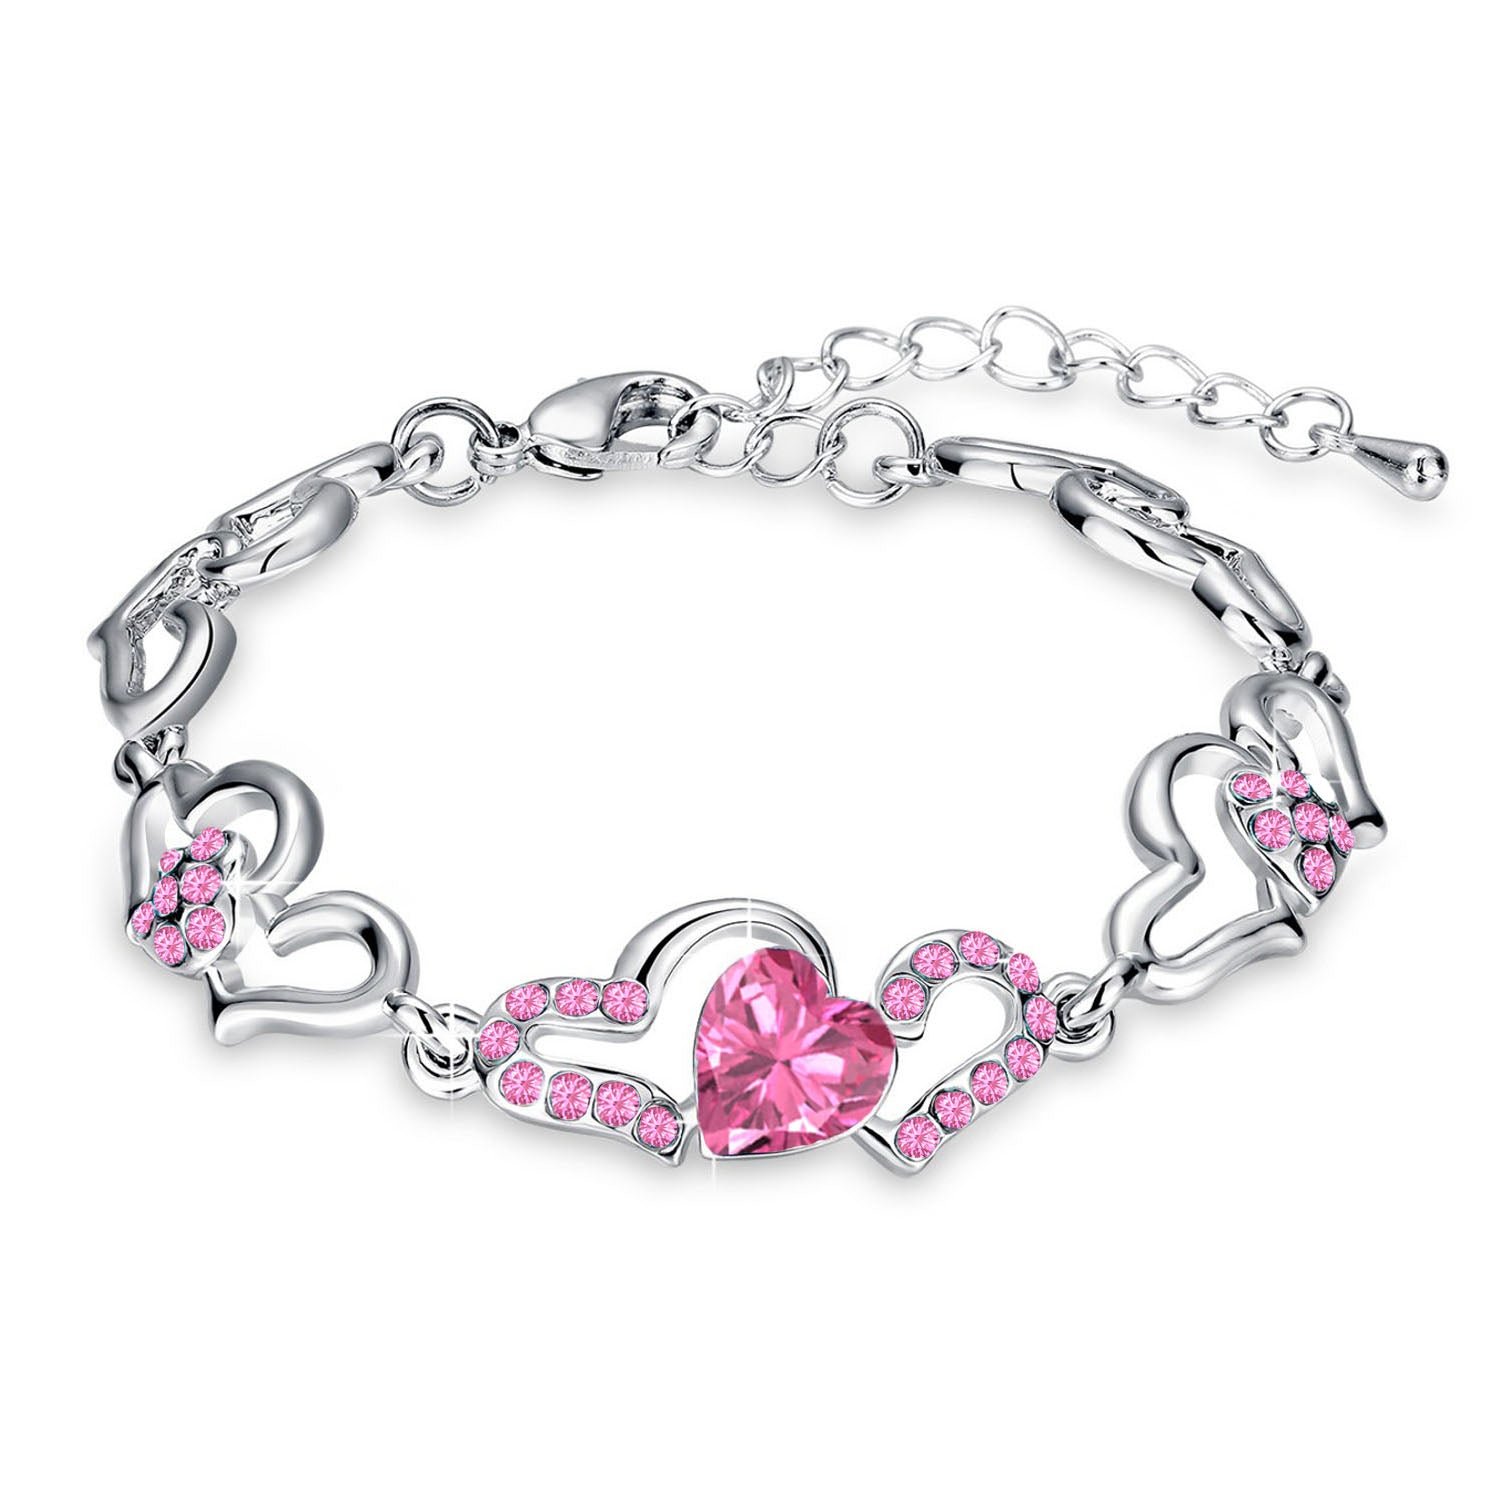 Mahi Rhodium Plated Valentine Collection Lovely Heart Link Bracelet with Pink Crystal stones